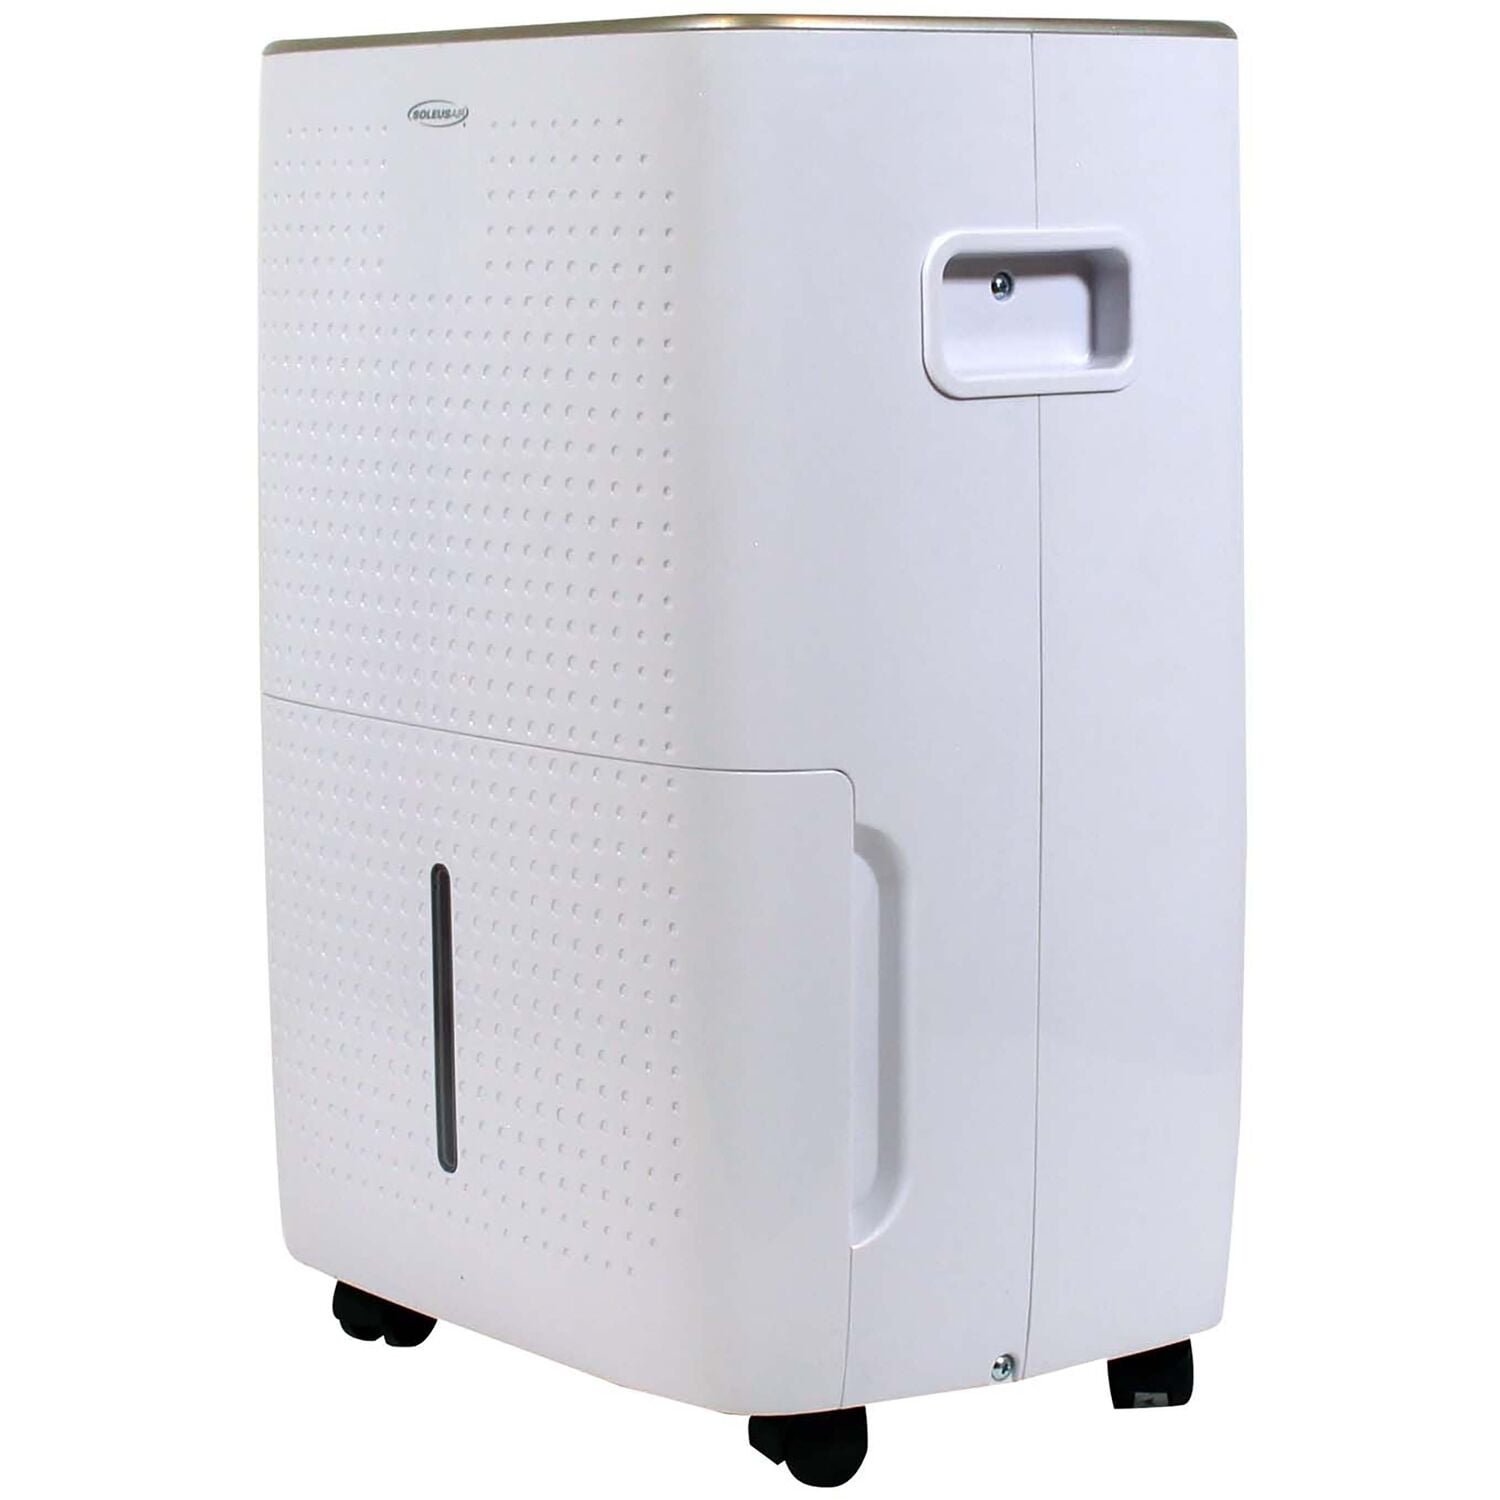 Picture of Soleus DSJ-25EW-01 25-Pint AC Energy Star Certified Dehumidifier with Mirage Display & Tri-Pat Safety